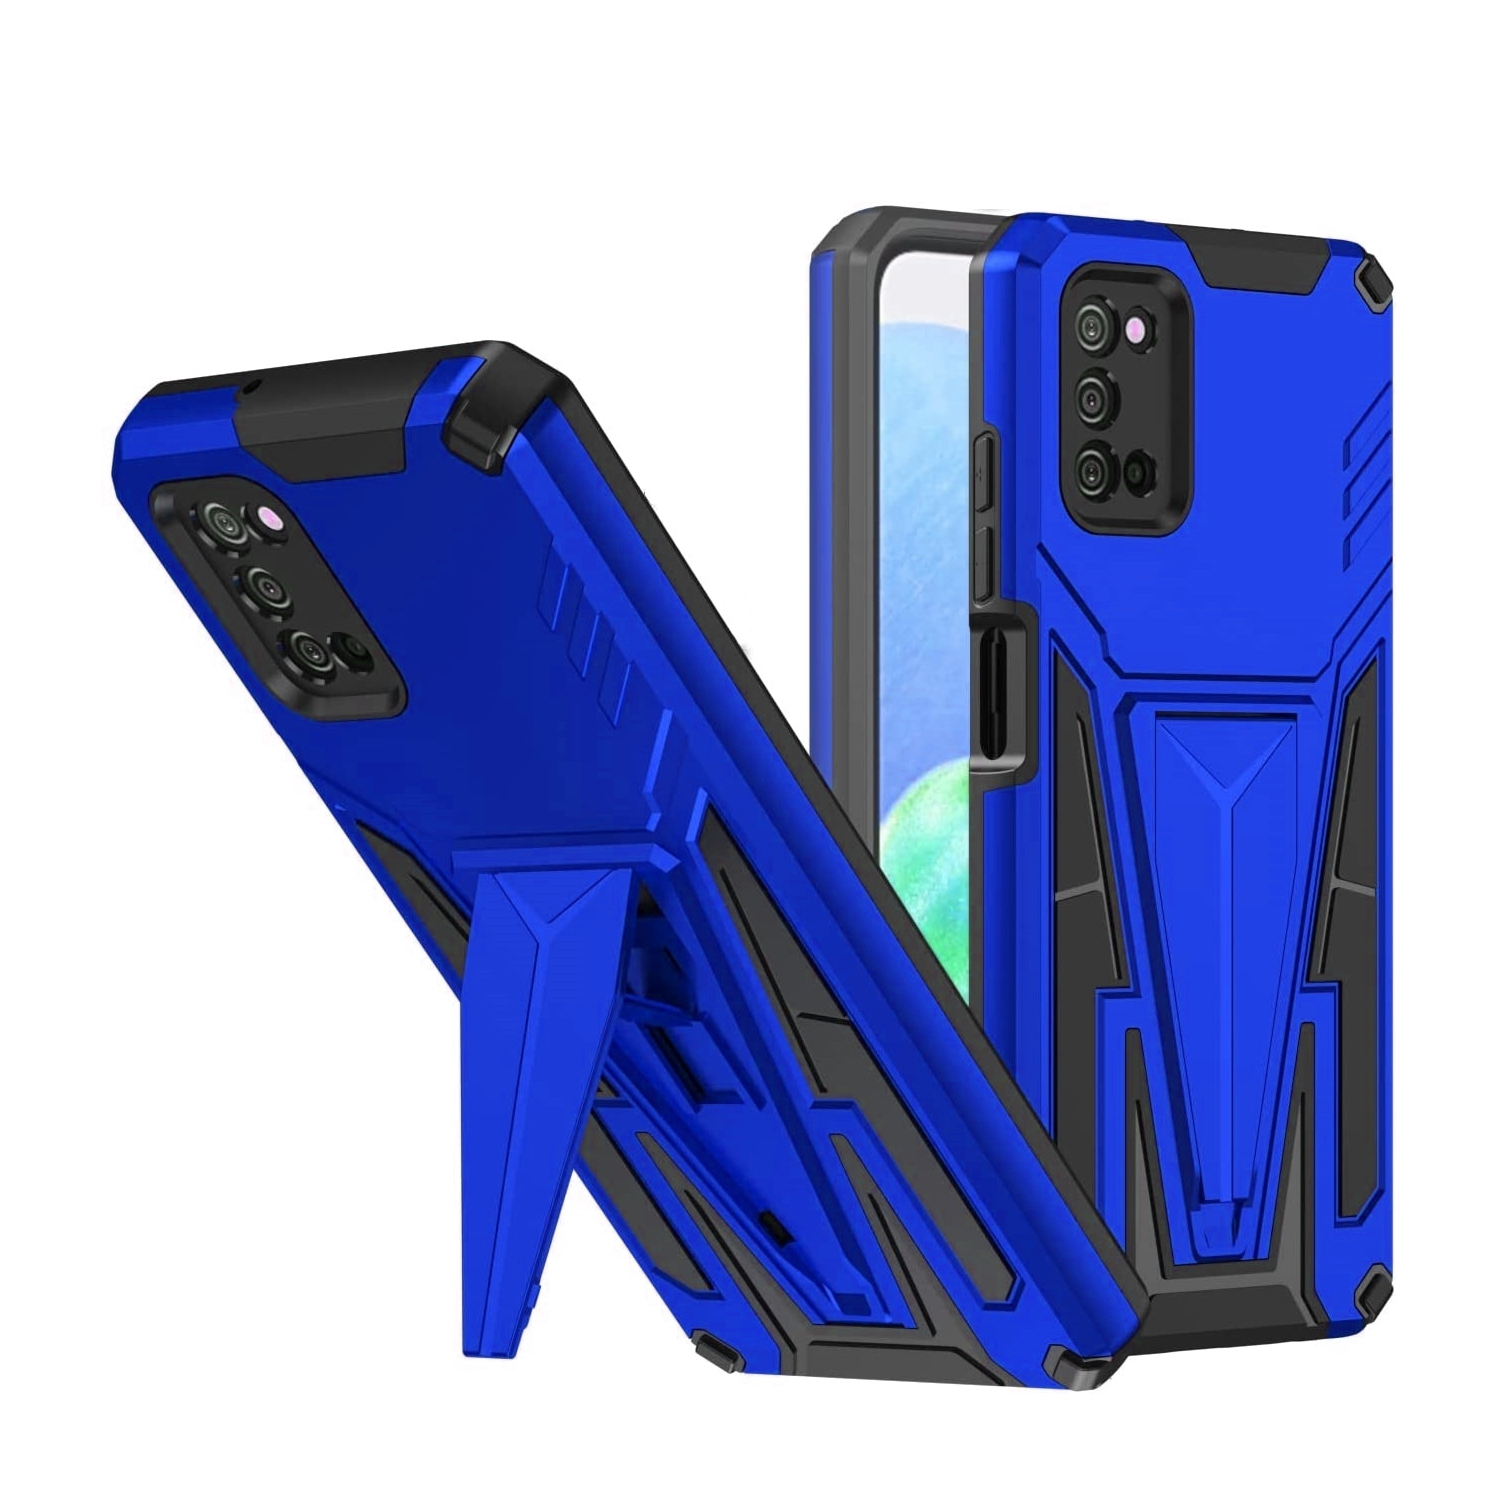 【CSmart】 Shockproof Heavy Duty Rugged Defender Hard Case Kickstand Cover for Samsung Galaxy A52 5G, Blue